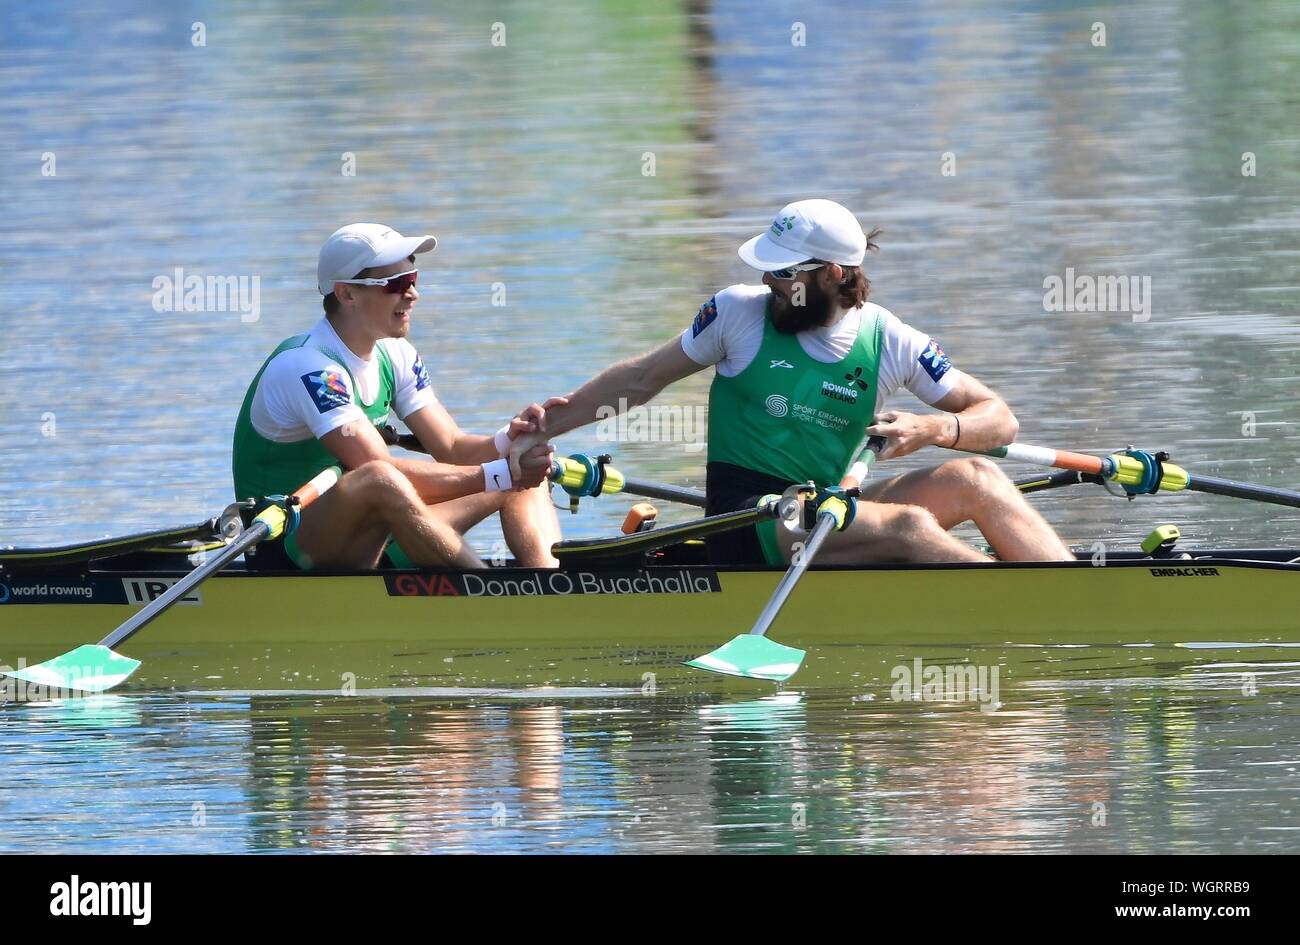 Fintan MCCARTHY and Paul O DONOVAN (IRE) gold in LM2x during World Championships Rowing on August 31. 2019 in Linz Ottensheim, Austria Photo: Soenar Chamid/SCS/AFLO (HOLLAND OUT) Stock Photo